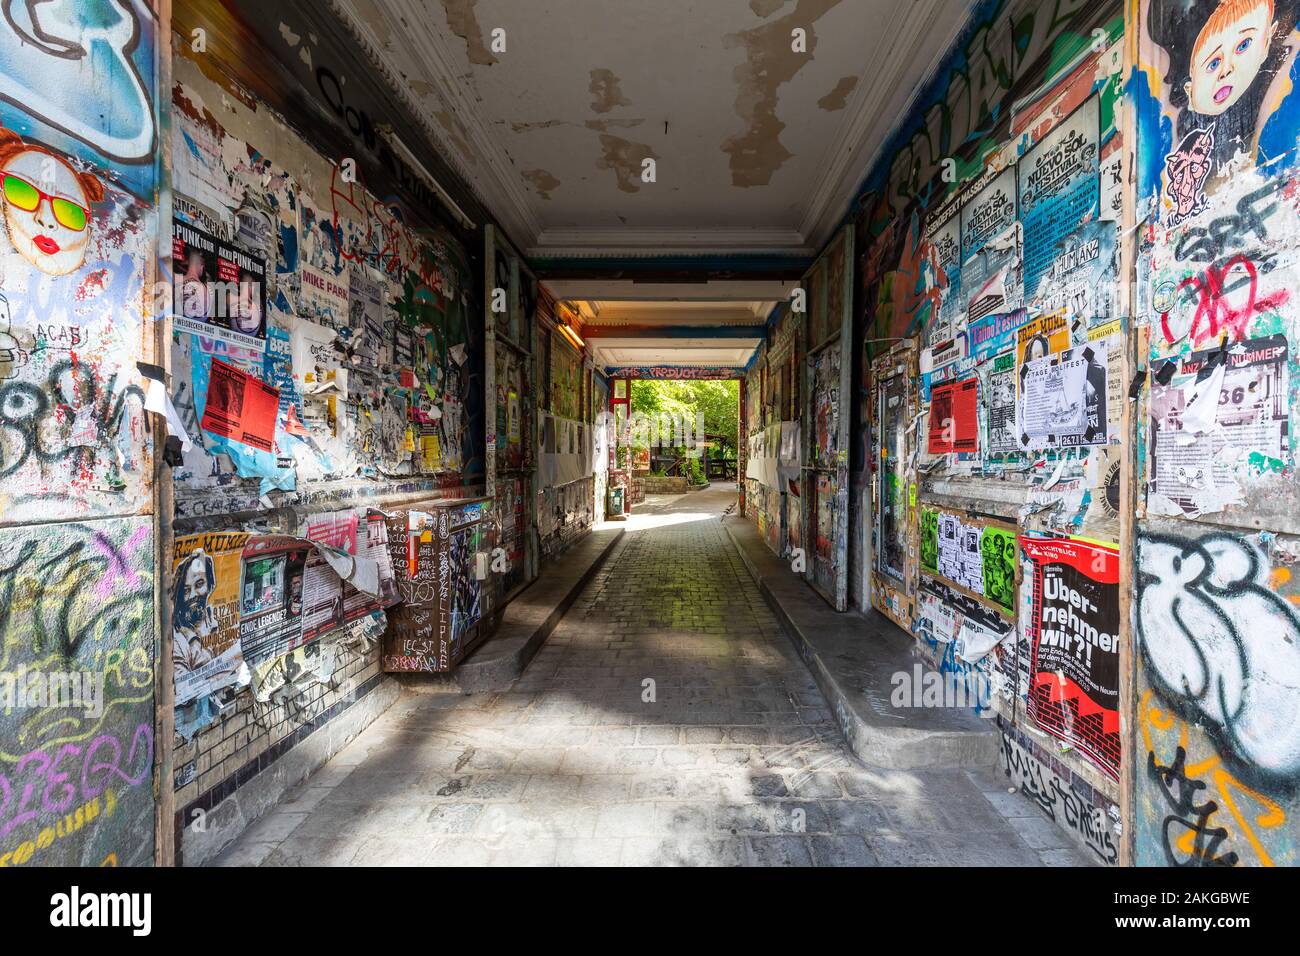 Symmetrical view of a community center in Kreuzberg covered with colorful graffiti and ads Stock Photo